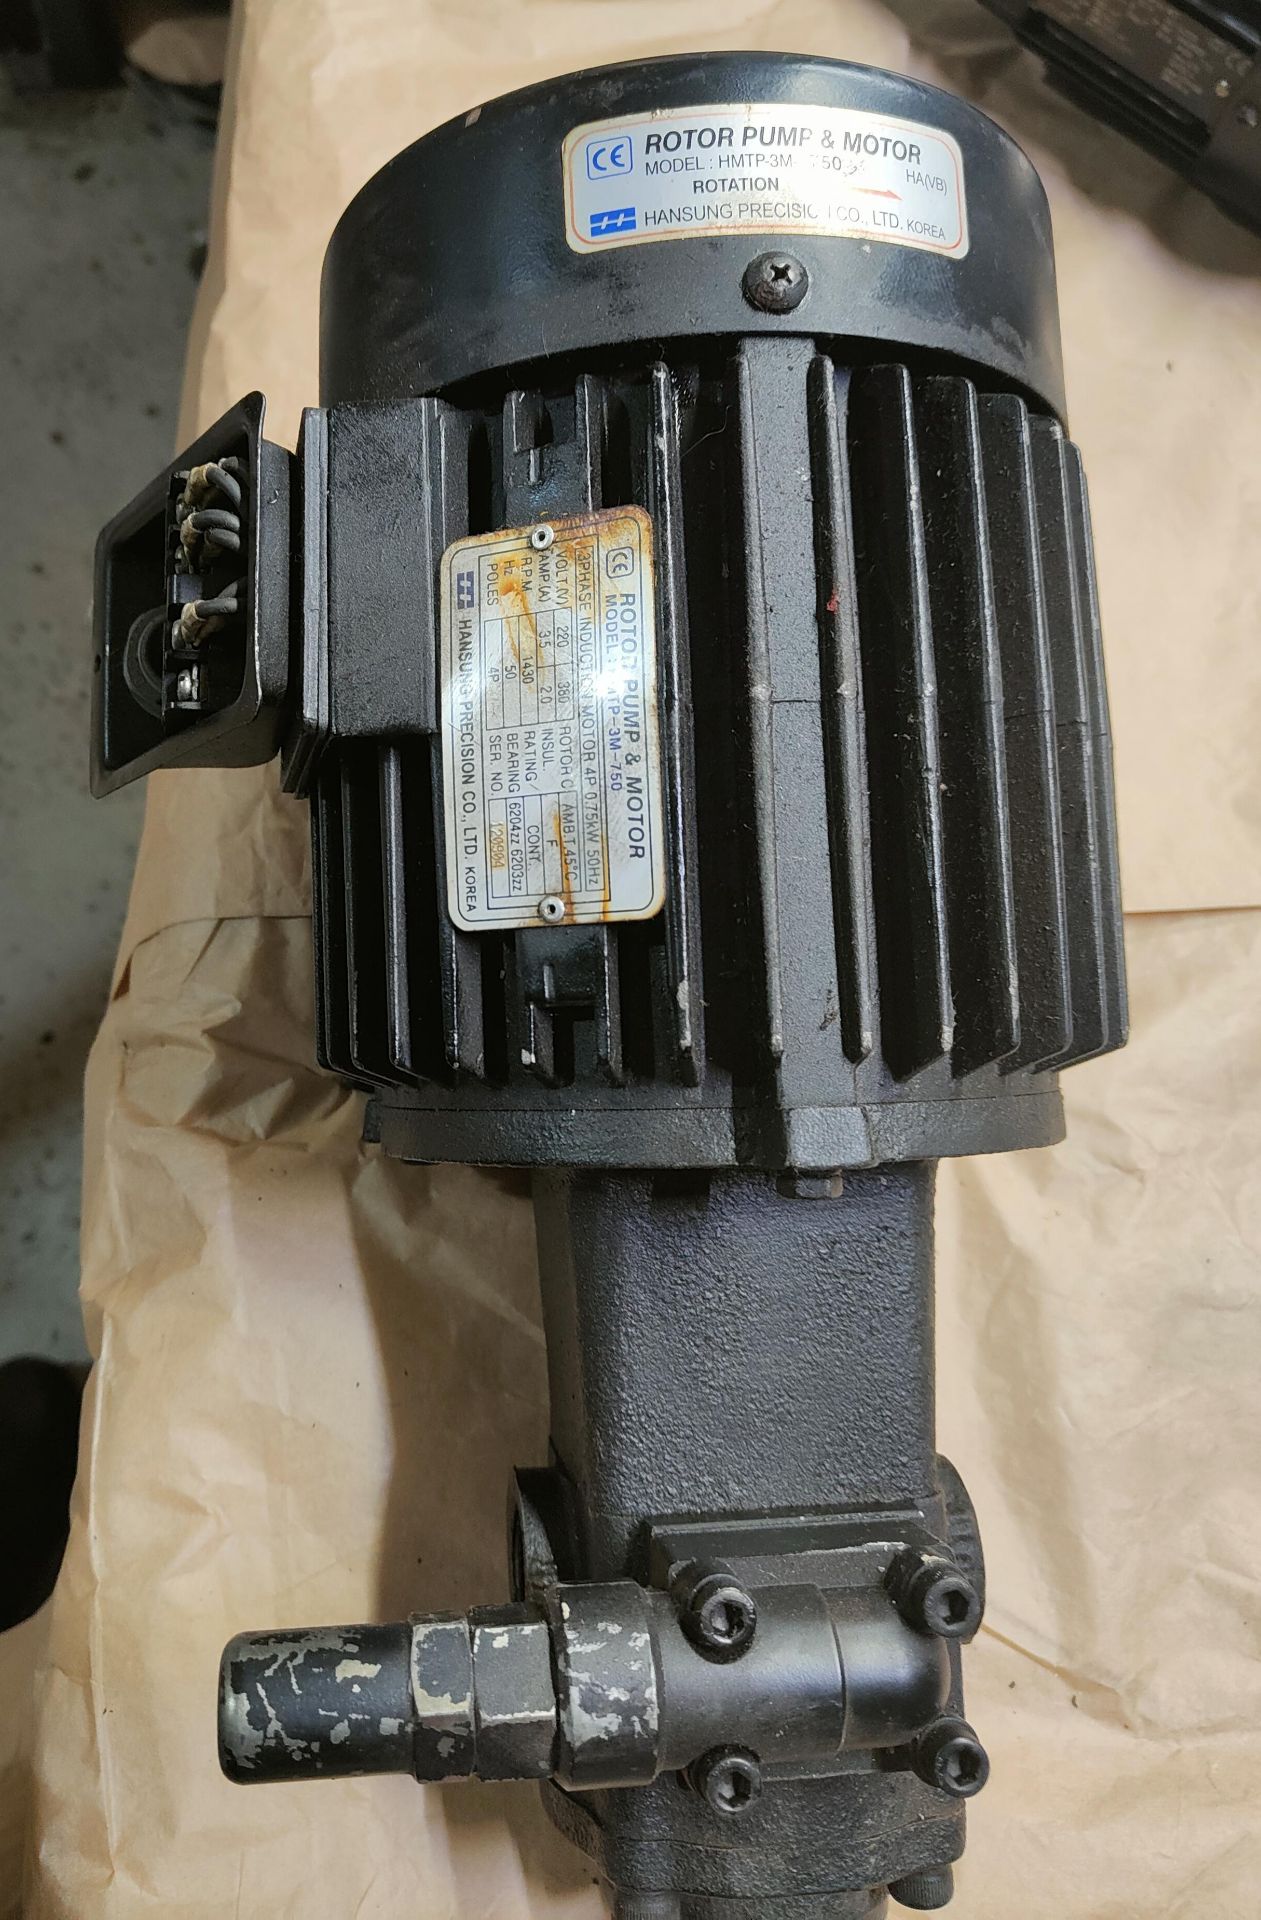 Hansung HMTP3M Three Phase Induction Motor, loading free of charge - yes (vendors comments -